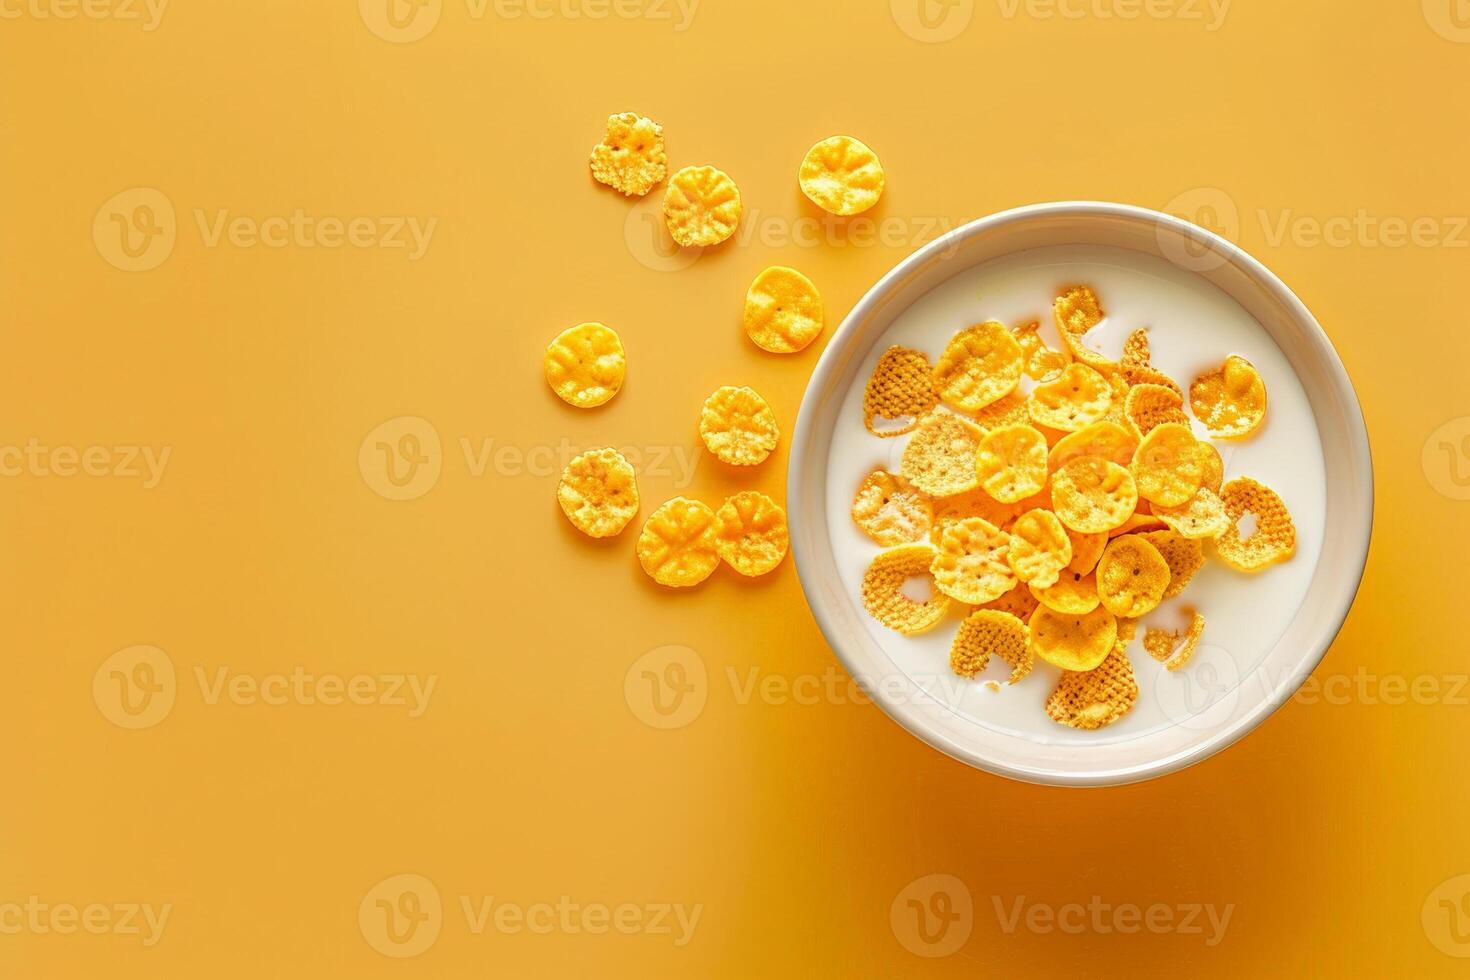 Overhead view of a bowl of milk with cereal, set against a gentle orange gradient background, morning theme photo